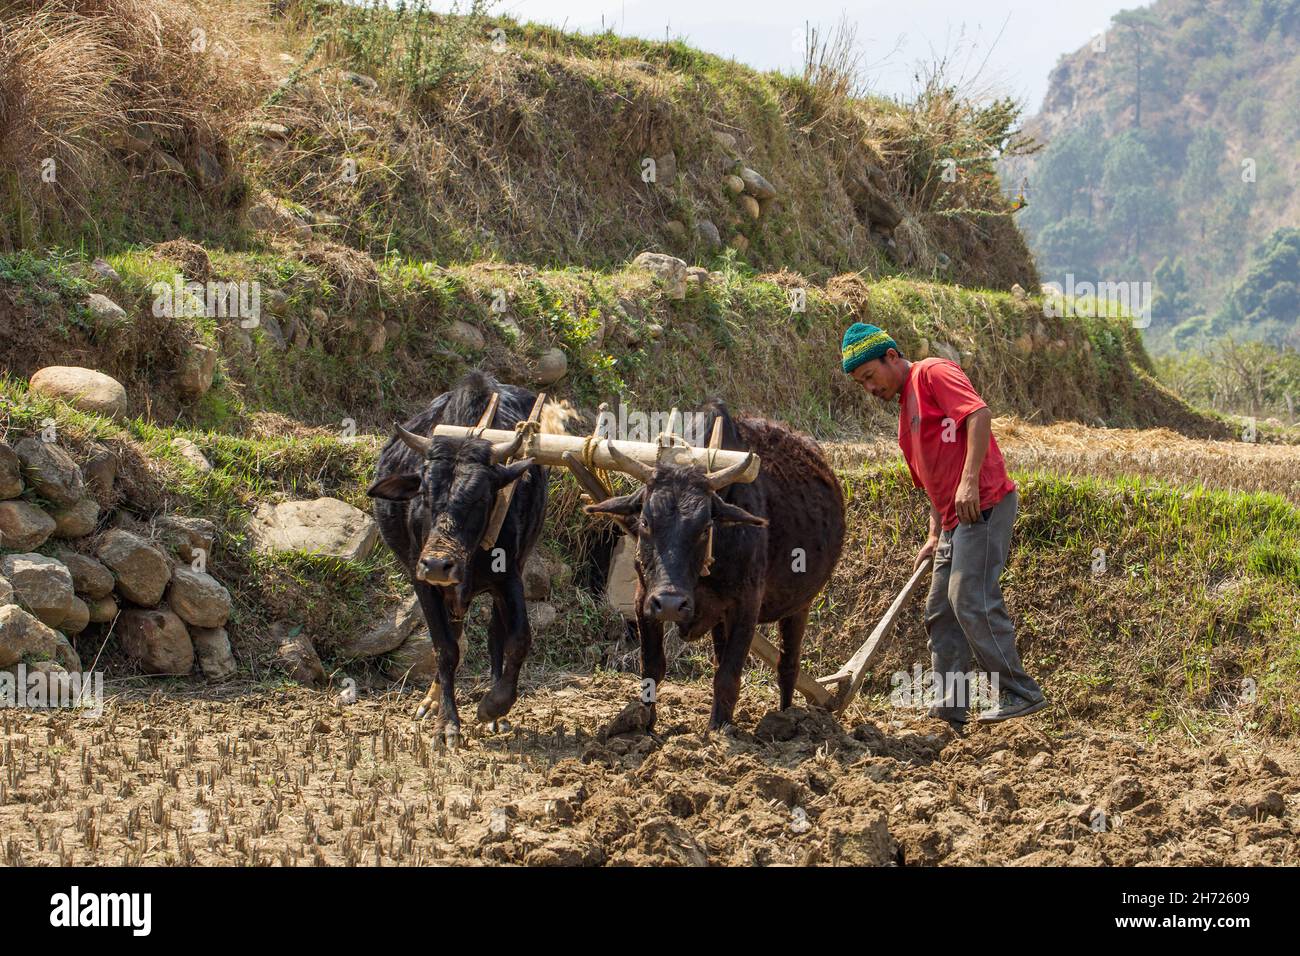 A Bhutanese man plows his rice field with oxen and traditional wooden plow.  Punakha, Bhutan. Stock Photo